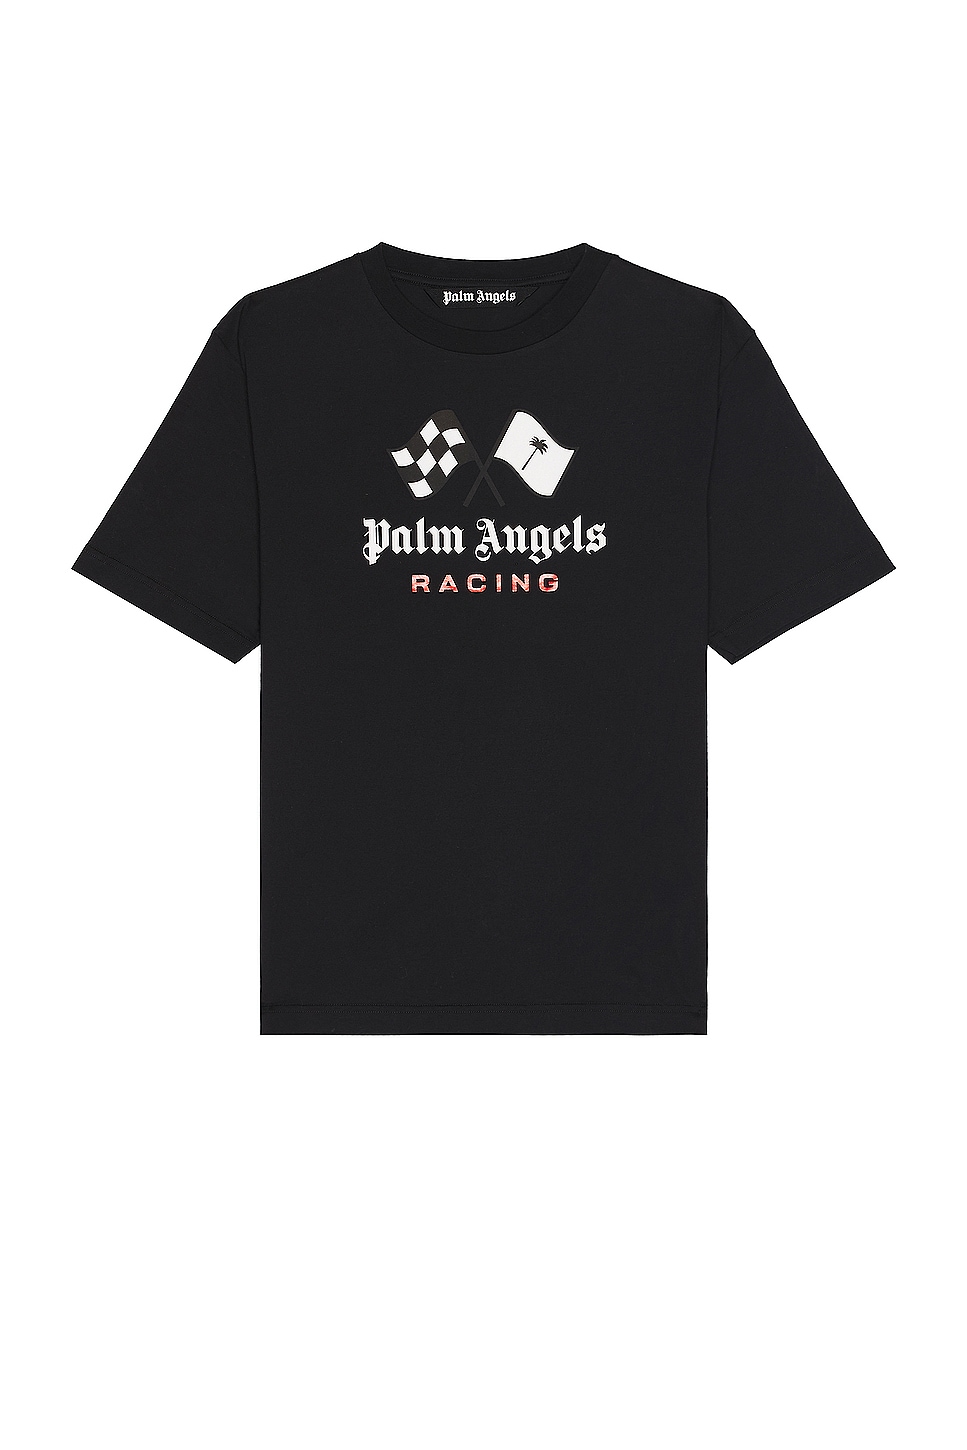 Image 1 of Palm Angels X Formula 1 Racing Tee in Black, White, & Red